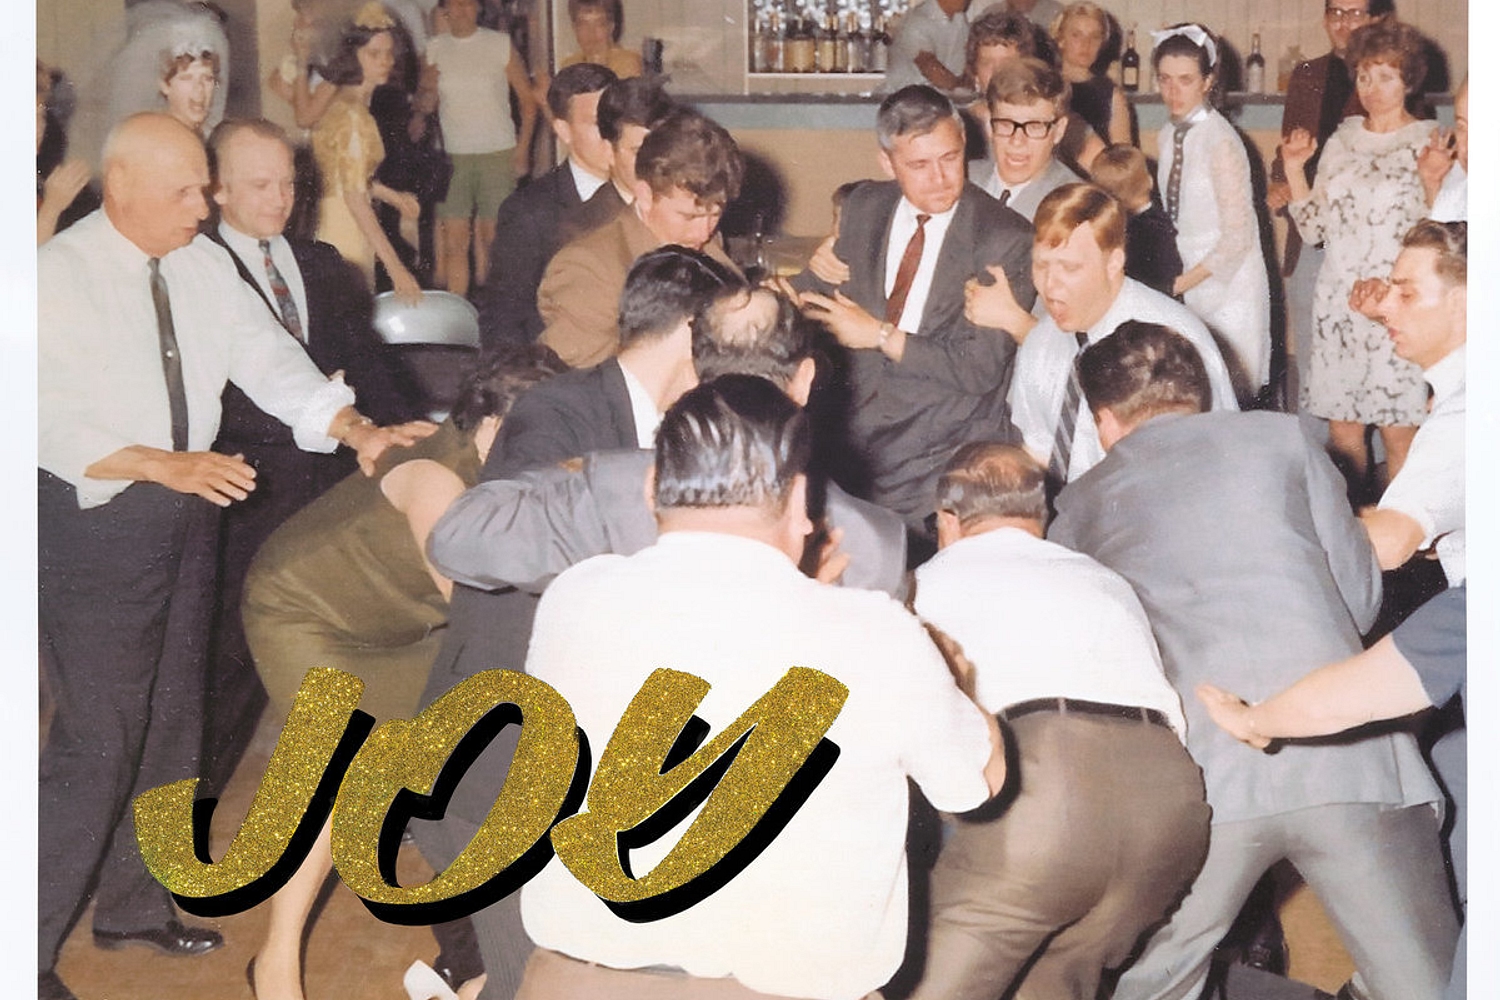 IDLES - Joy As An Act Of Resistance